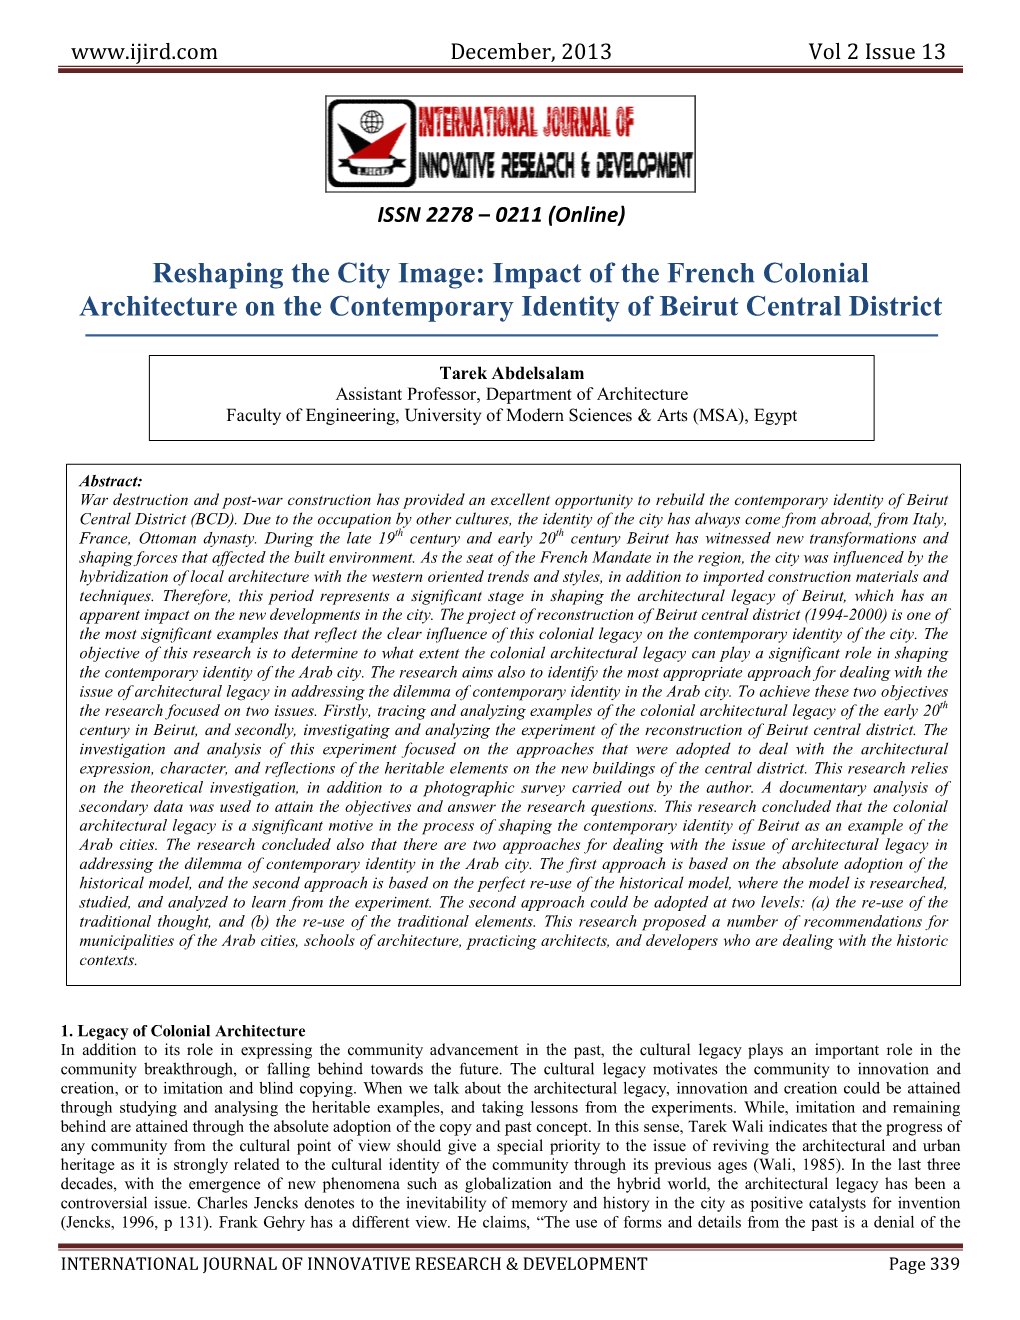 Reshaping the City Image: Impact of the French Colonial Architecture on the Contemporary Identity of Beirut Central District